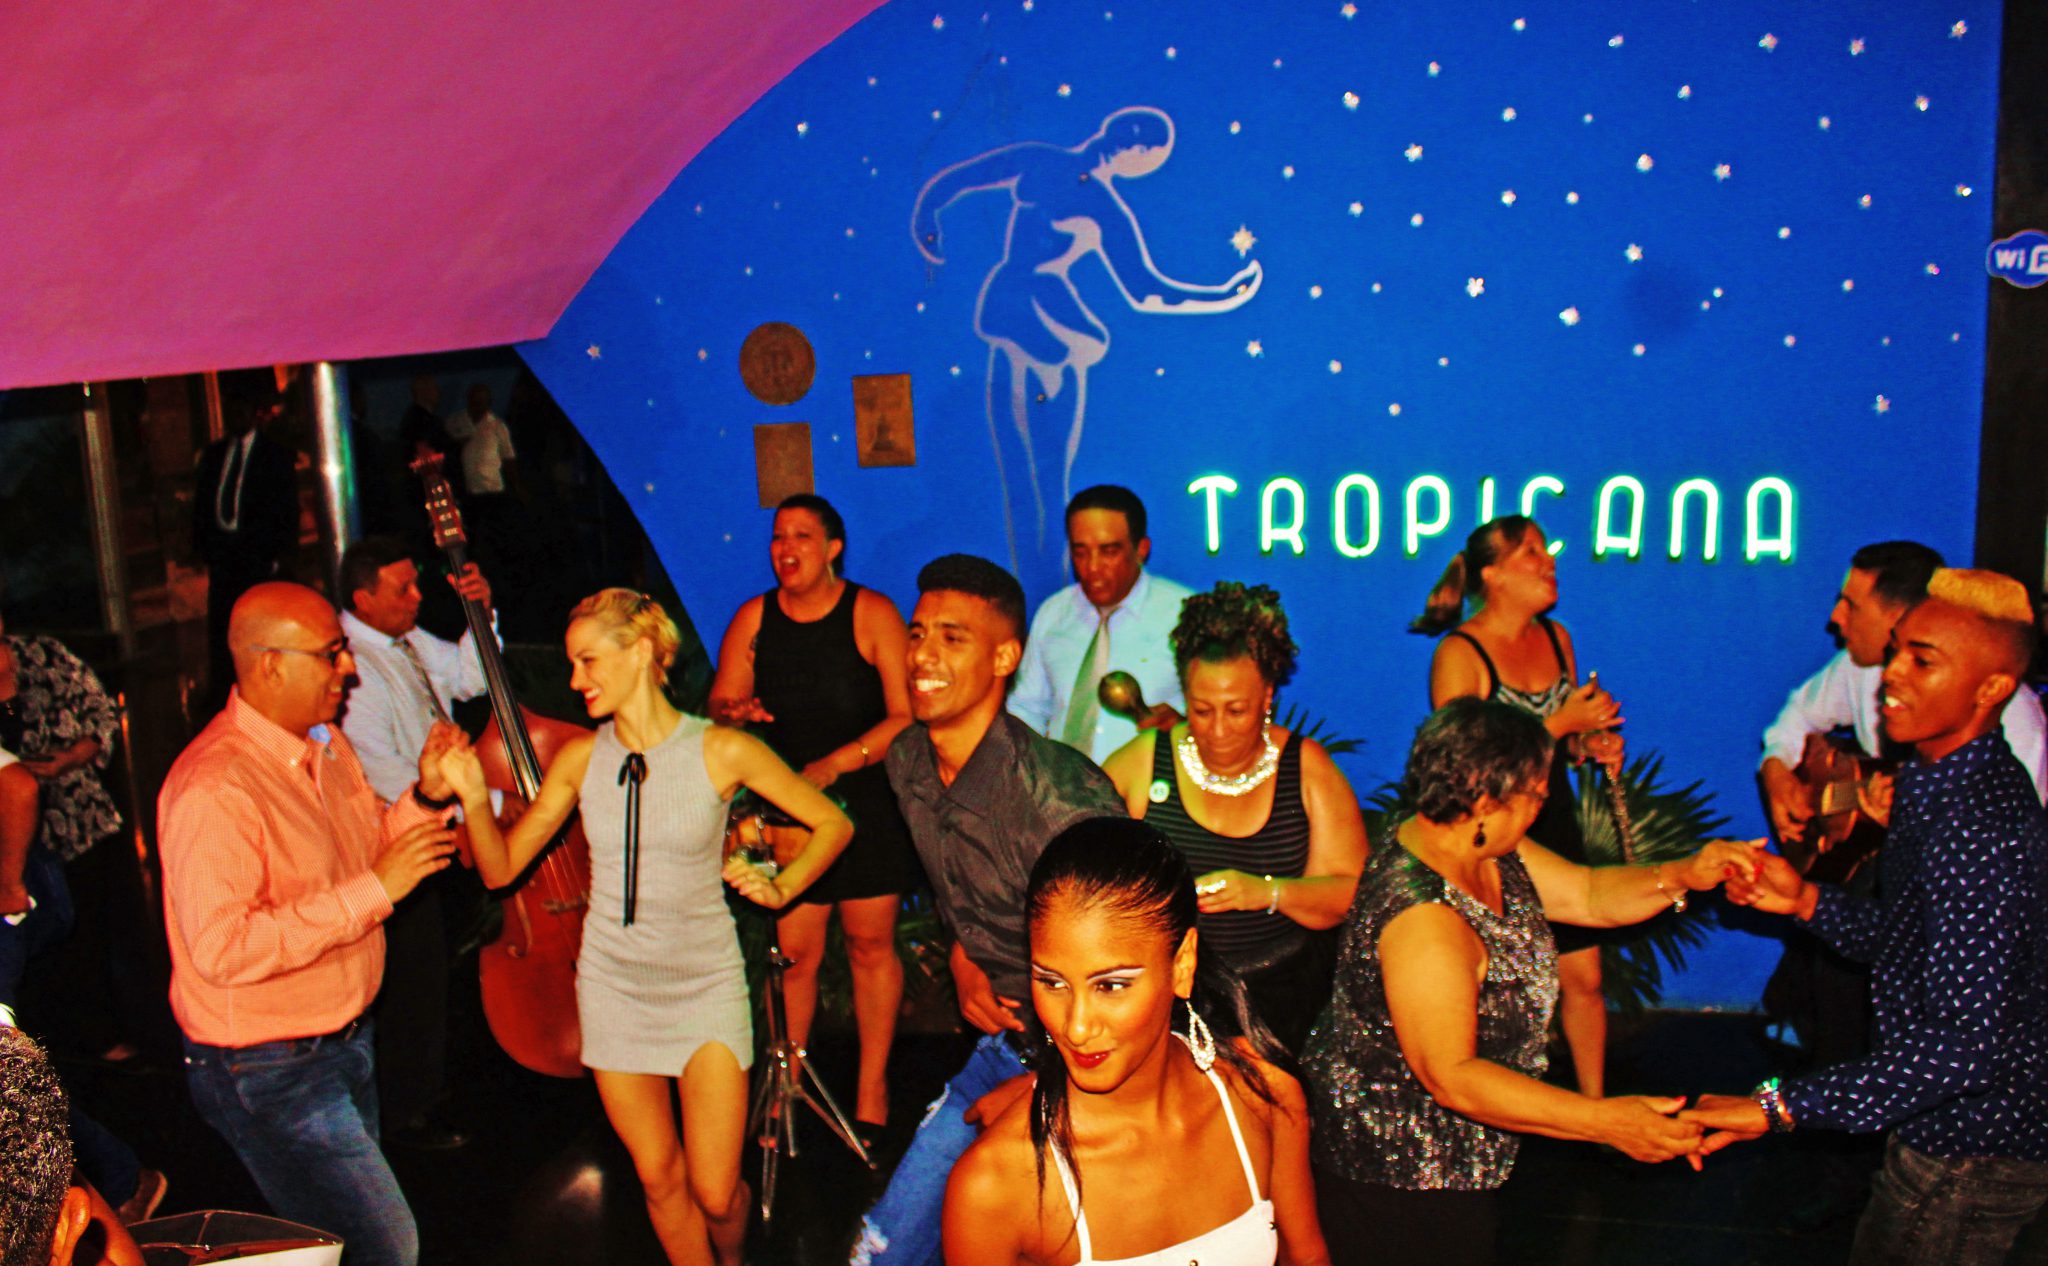 The Tropicana Cabaret experience starts in the lobby entrance as members of the troupe greet visitors with an invitation to salsa as they wait in the Que to enter the cabaret.